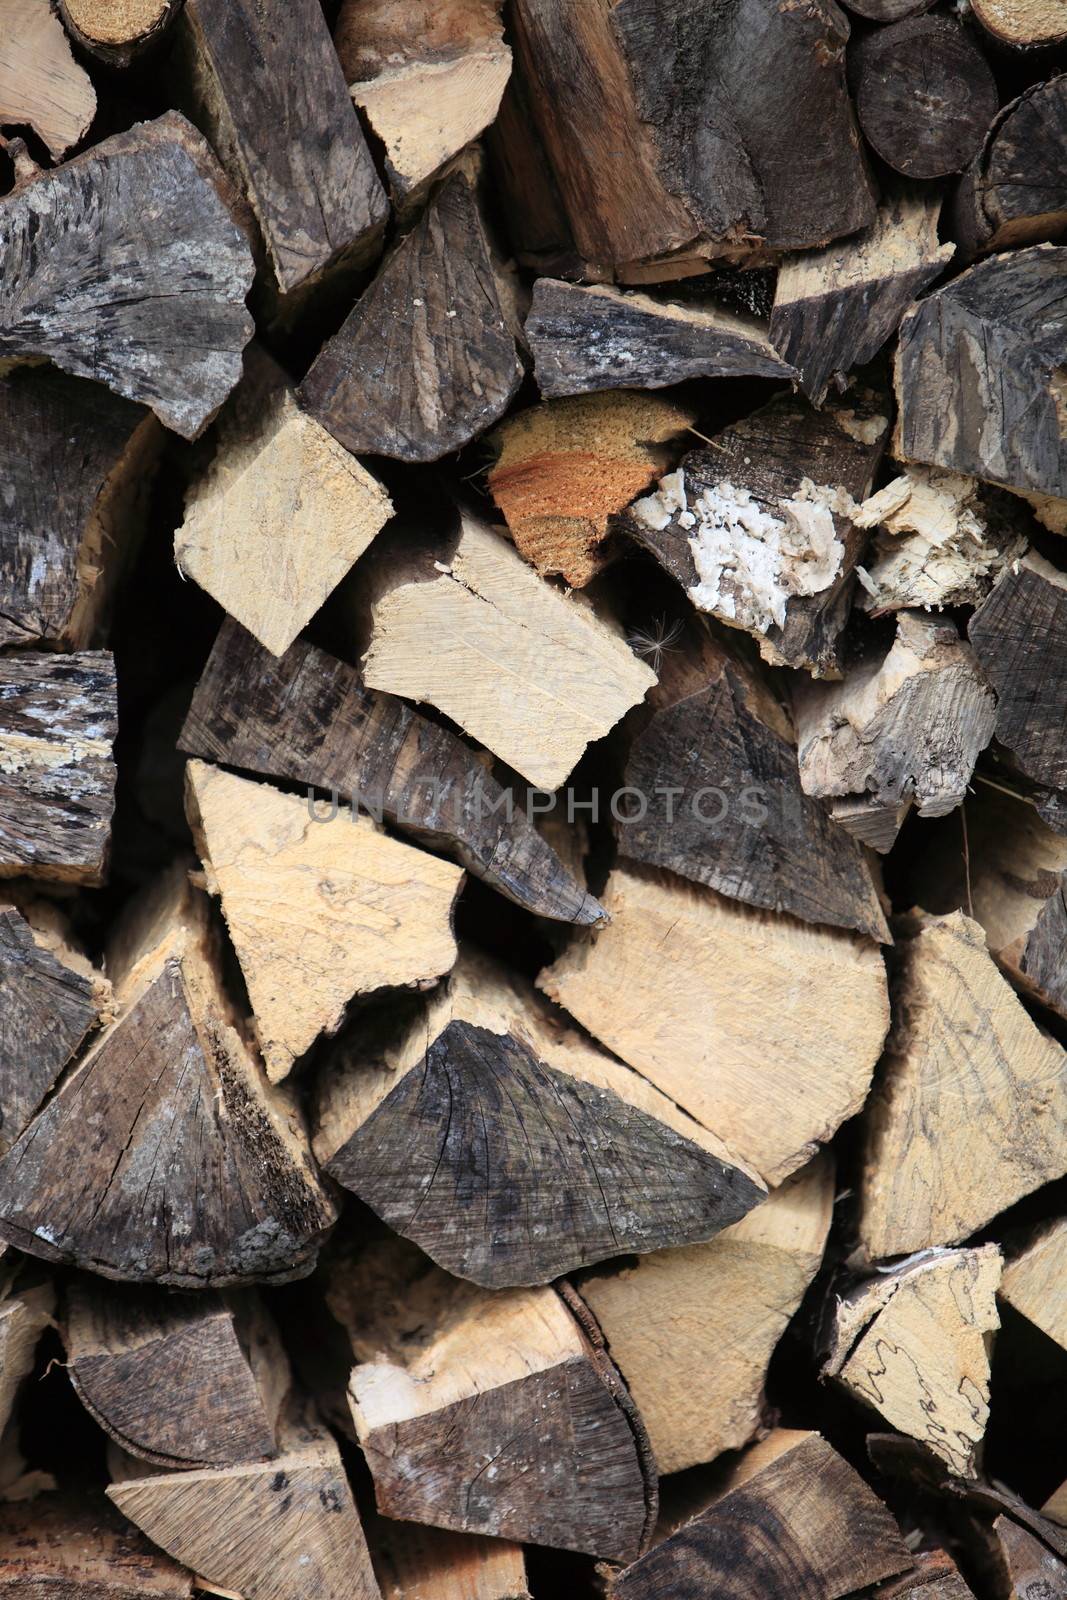 Stockpile of chopped wood showing the cut cross-sections of the logs stored for winter heating